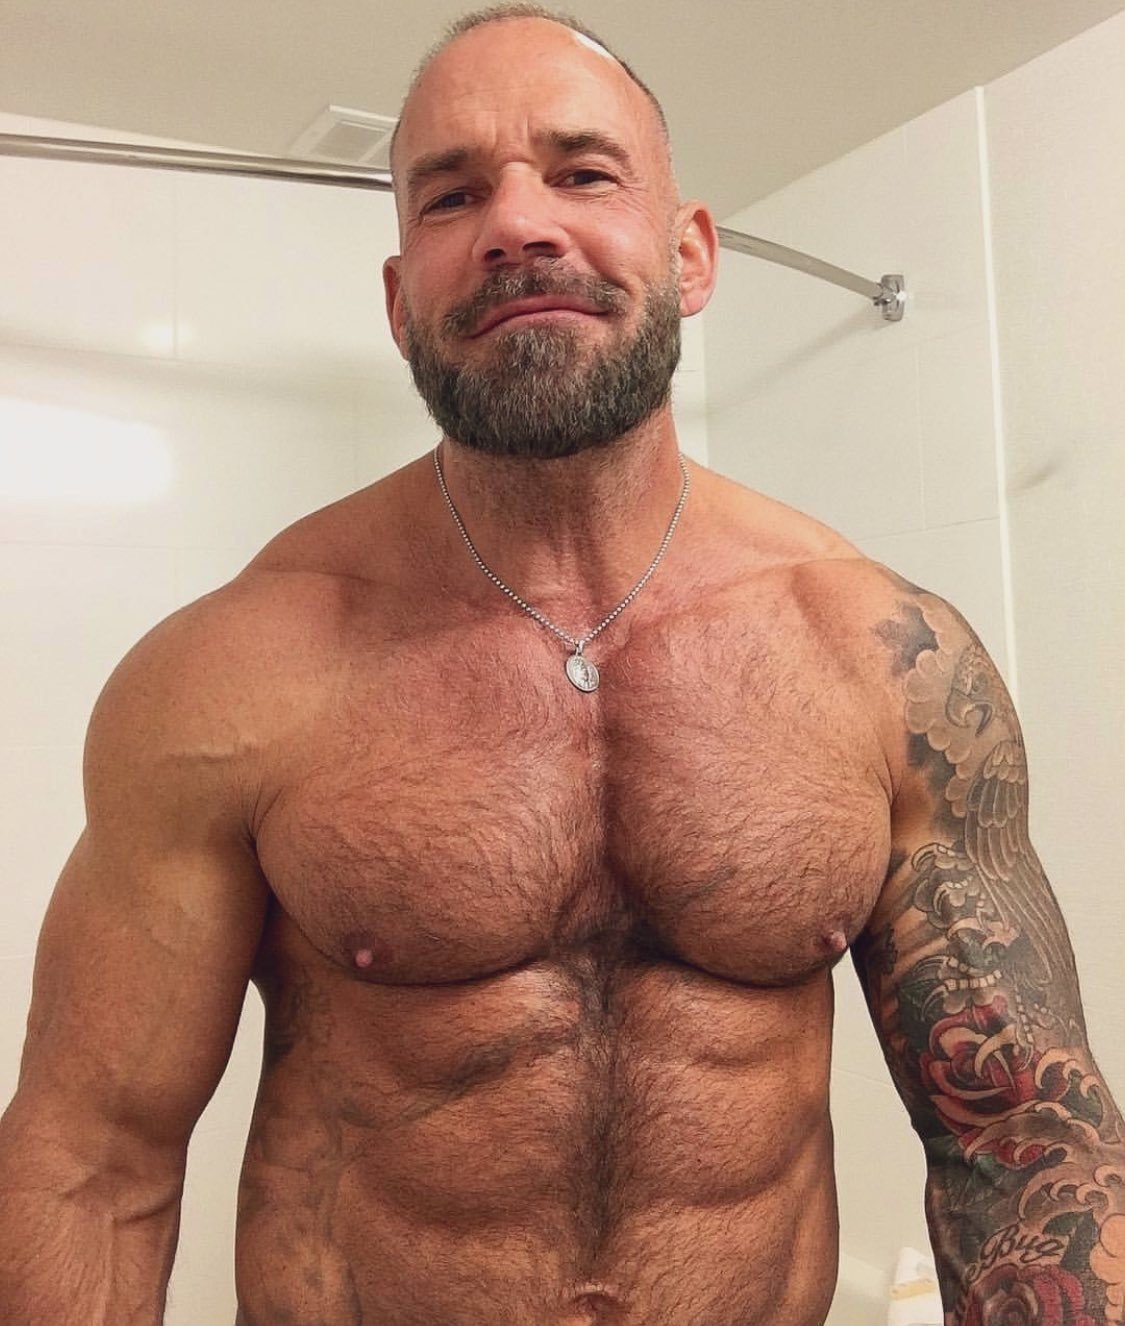 Photo by Smitty with the username @Resol702,  April 25, 2019 at 11:55 PM. The post is about the topic Gay DILF